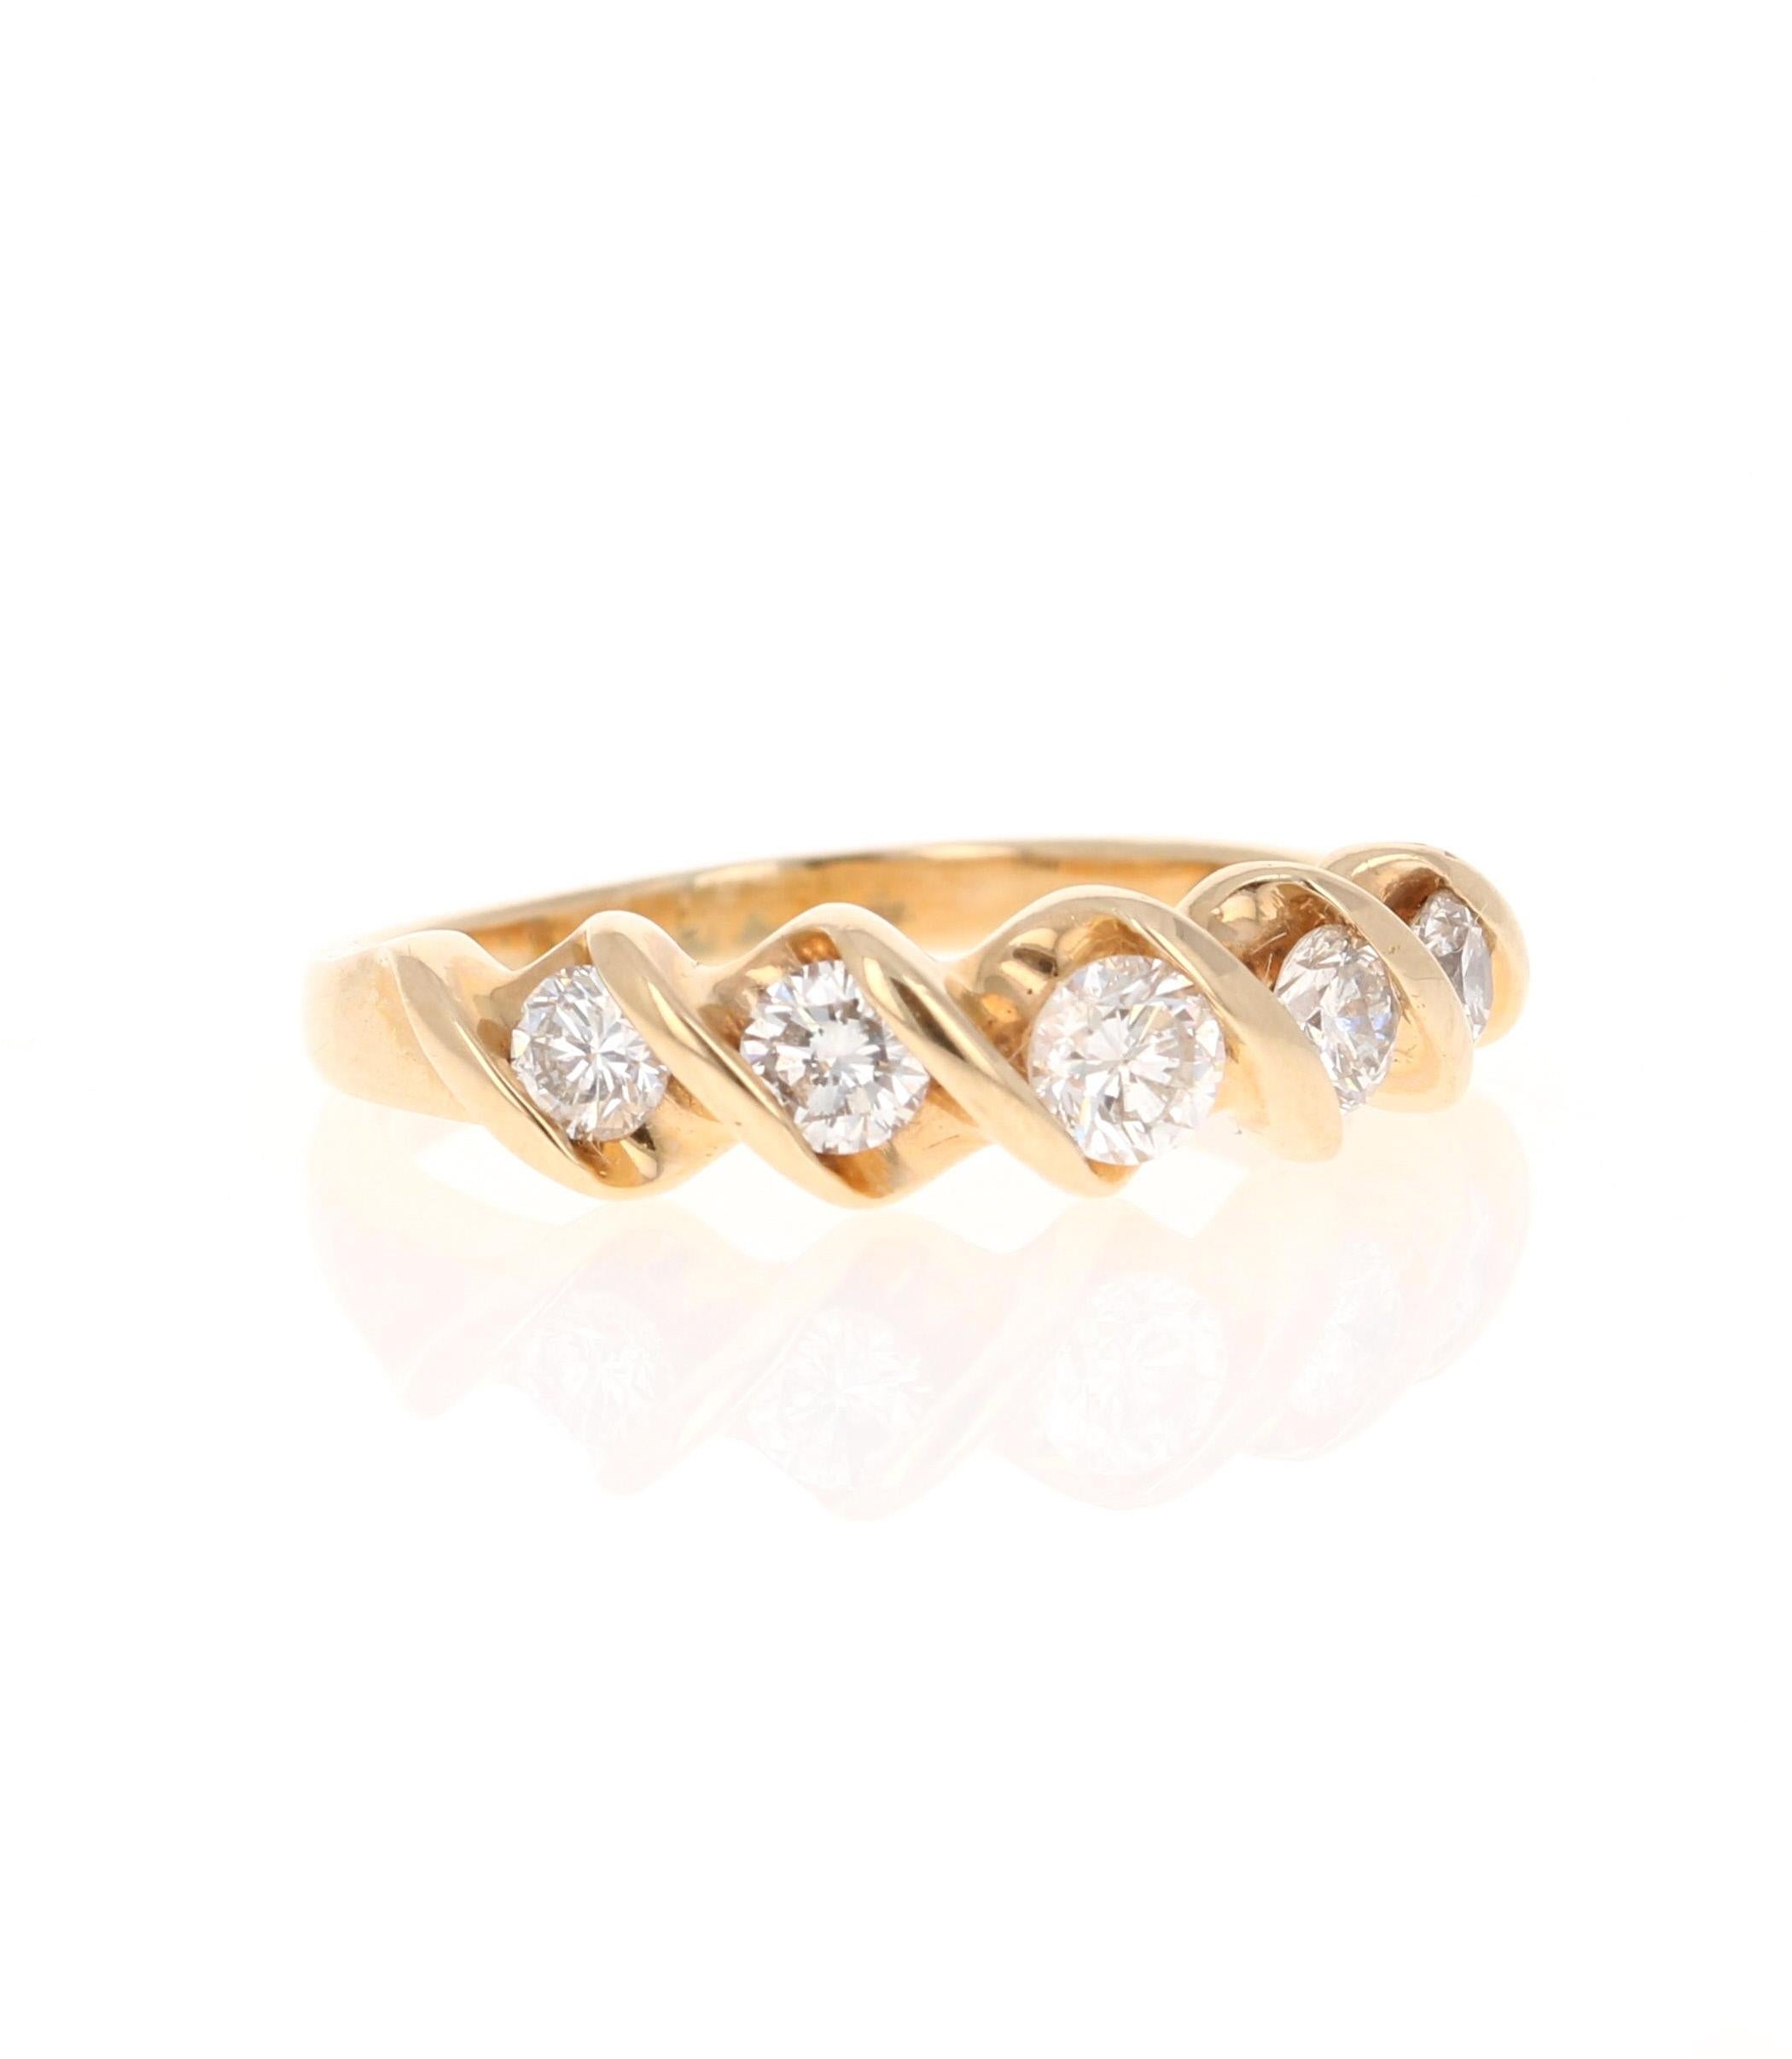 A beautiful band that can be worn as a single band or stack with other bands in other colors of Gold! 

This ring has 5 Round Cut Diamonds that weigh 0.55 Carats. The clarity and color of the diamonds are VS-H.

Crafted in 14 Karat Yellow Gold and